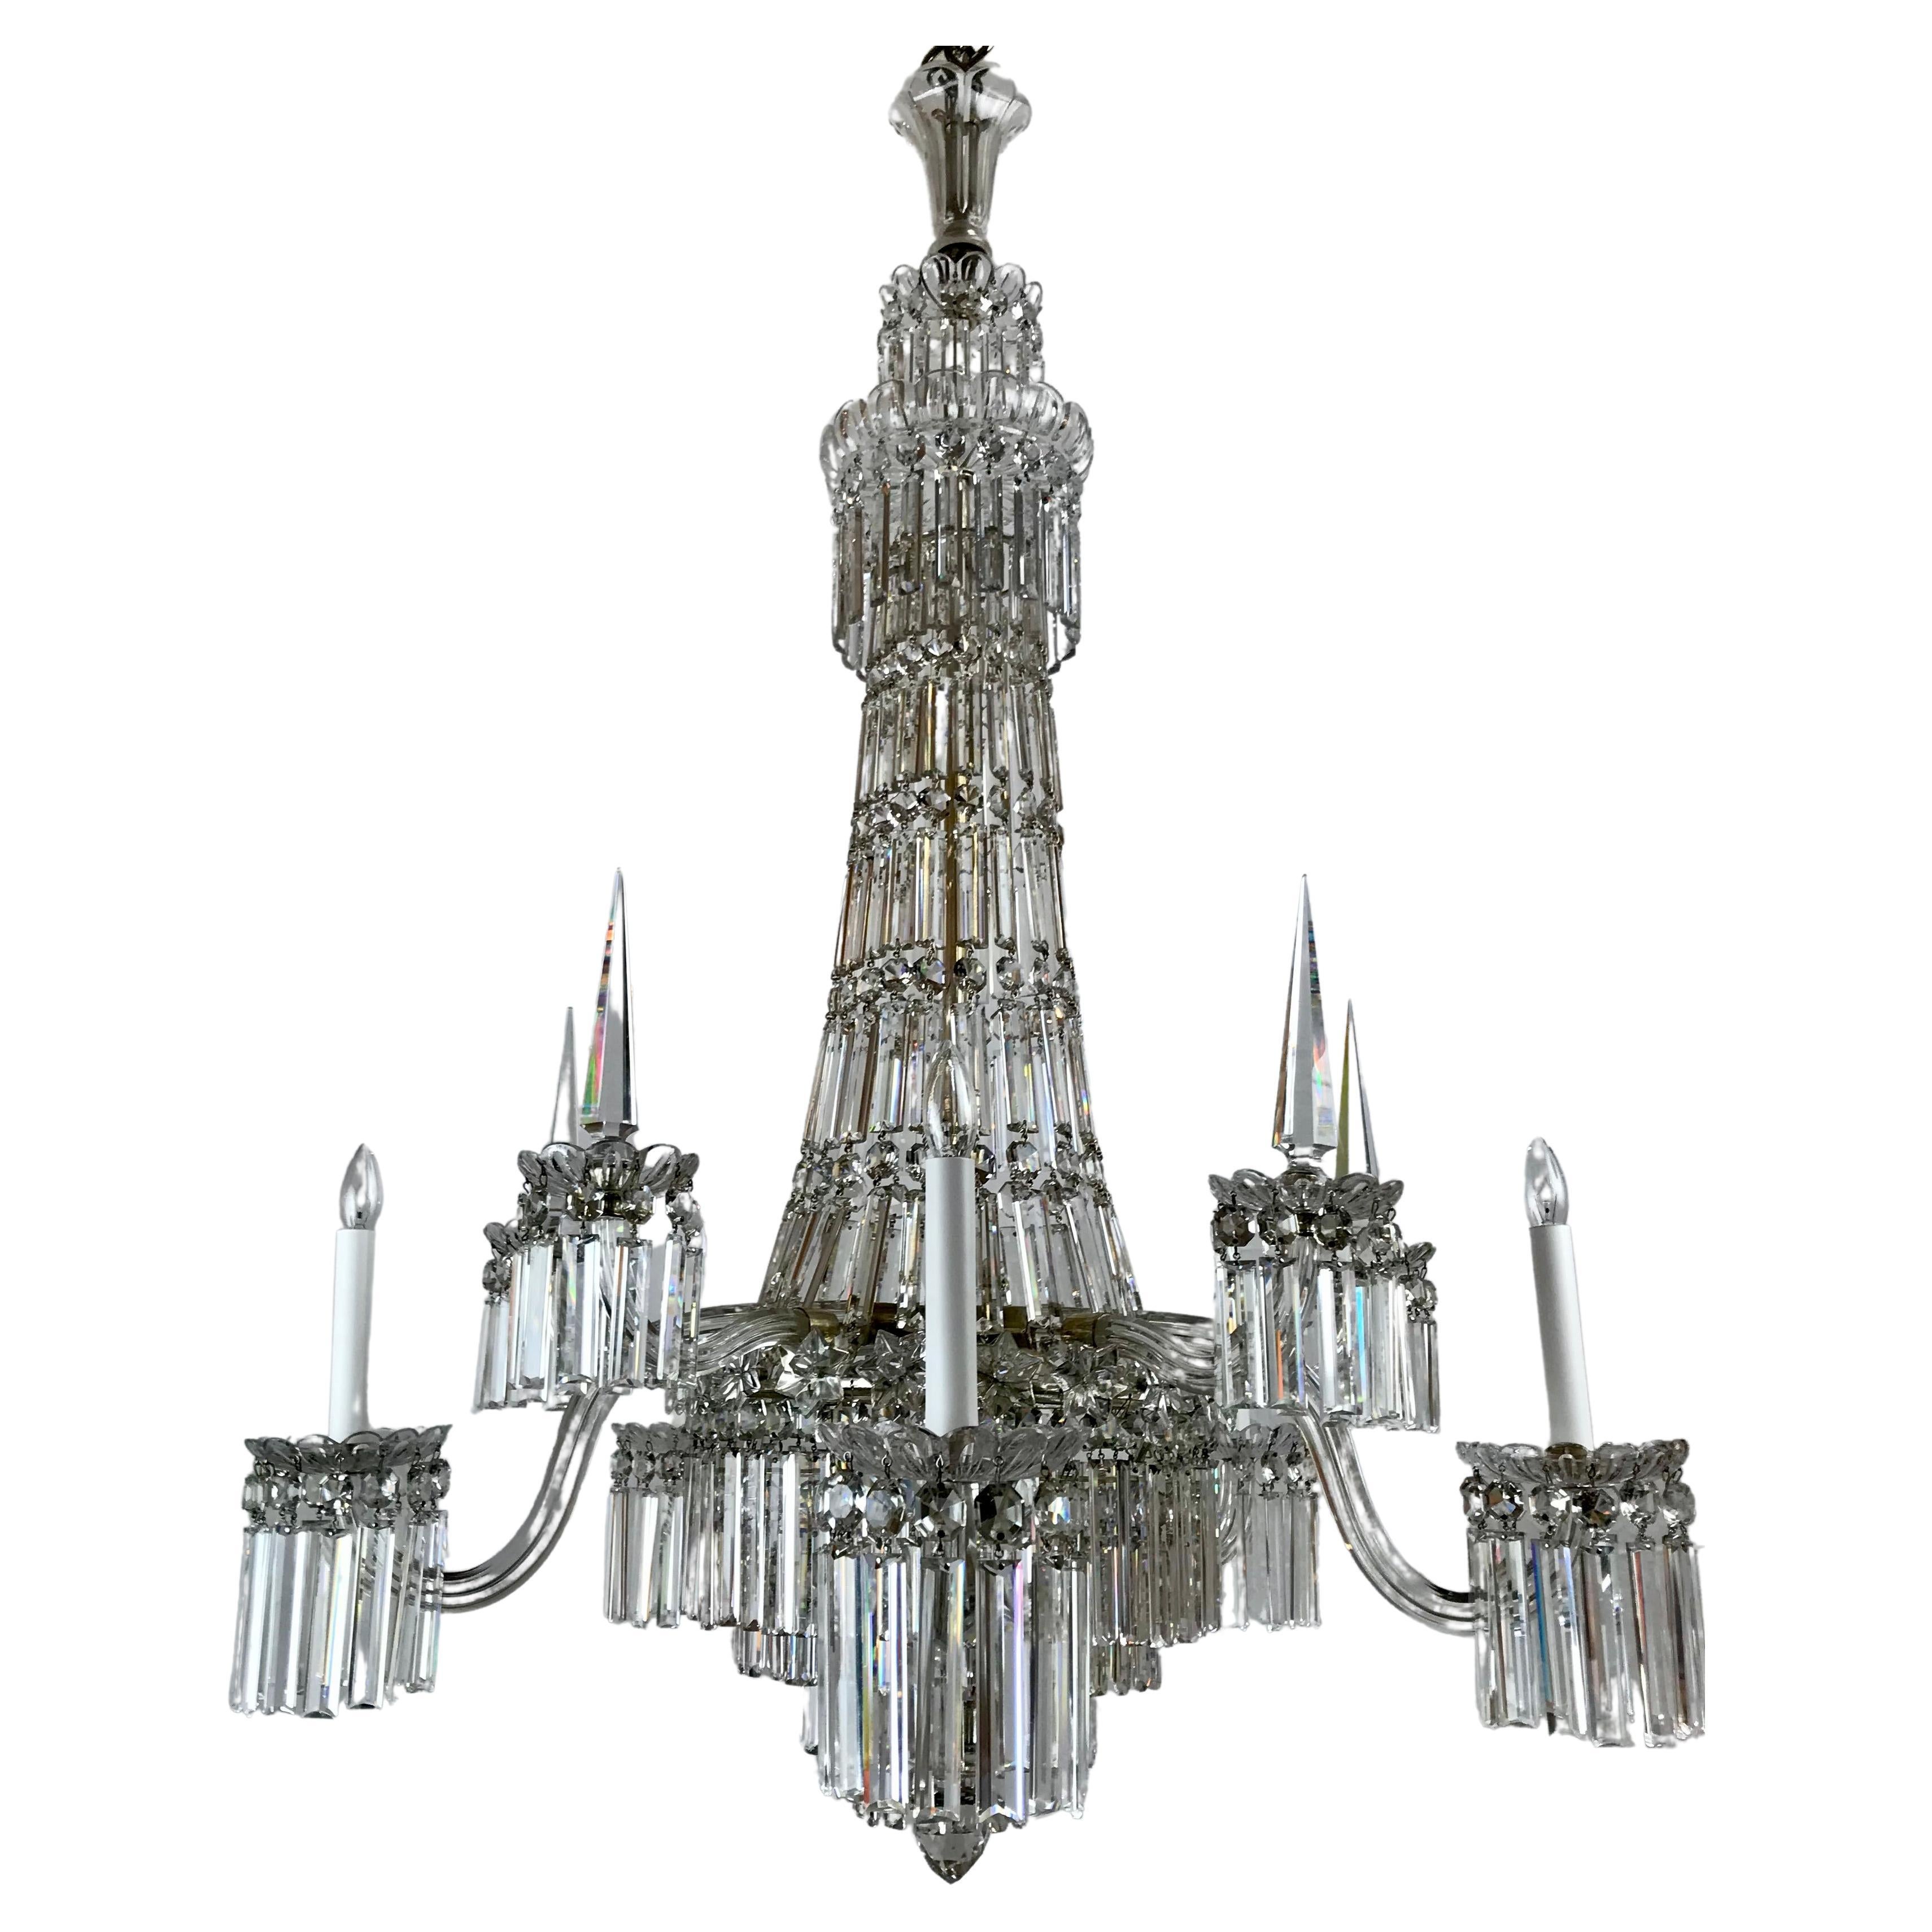  Mid 19th Century Crystal Chandelier by F&C Osler of Tent and Waterfall Design For Sale